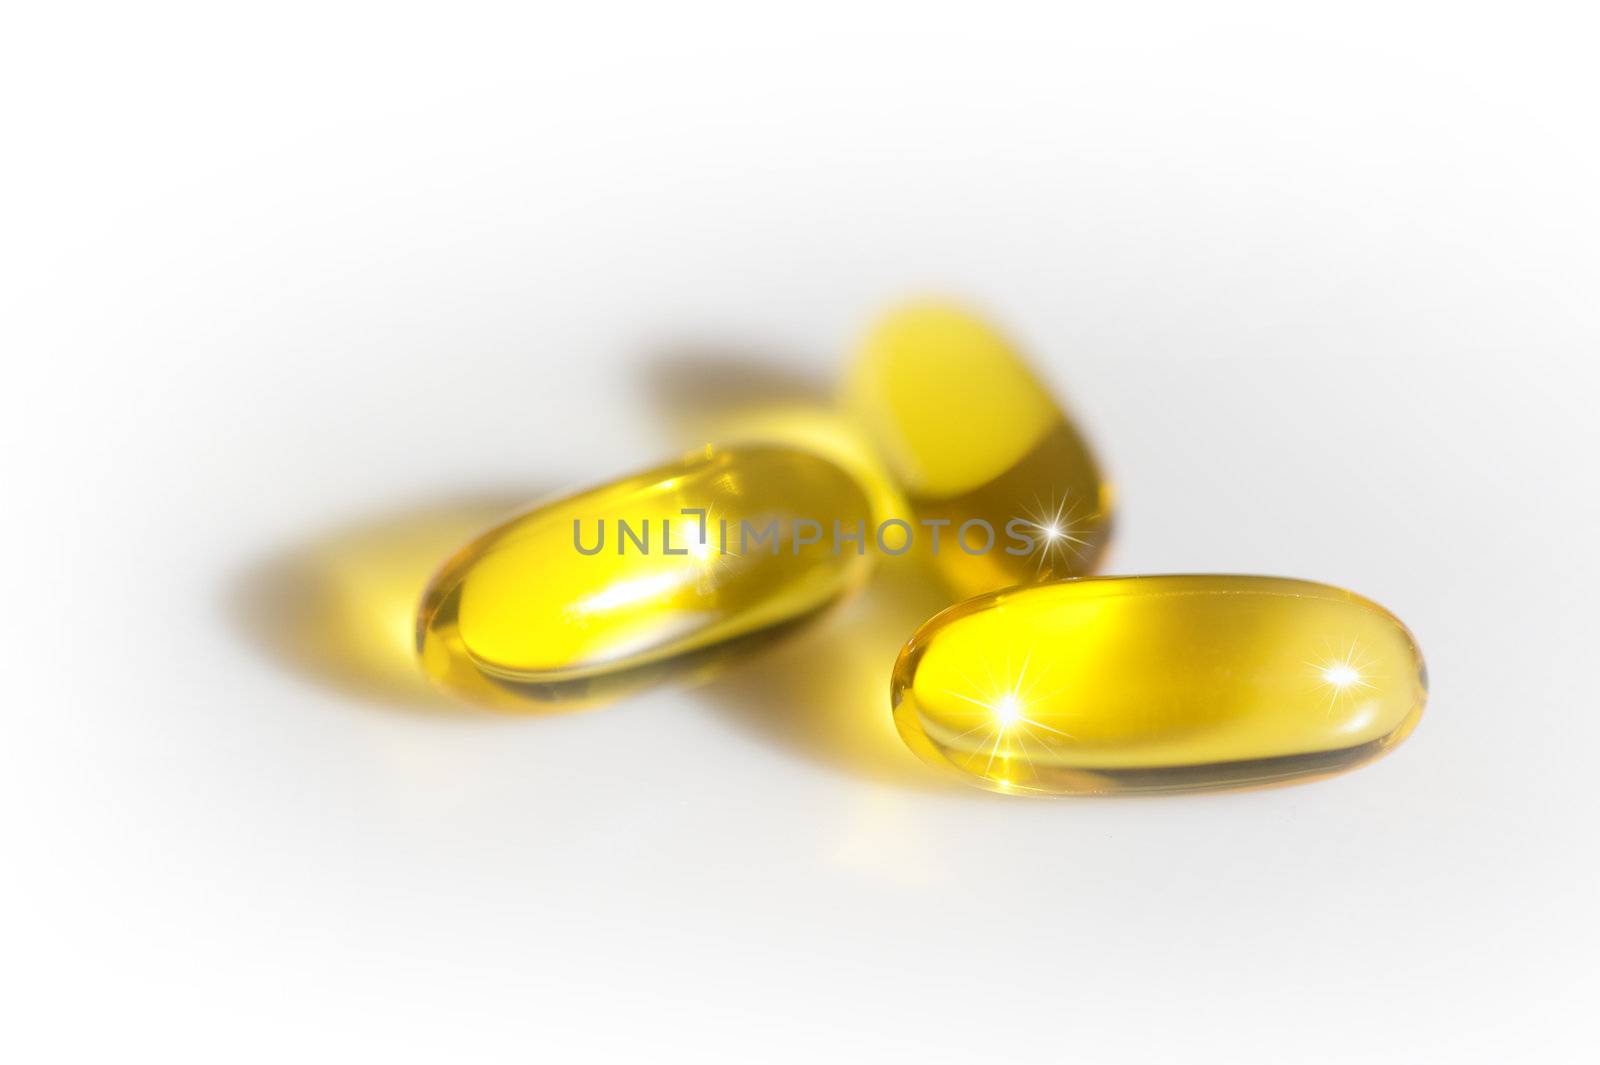 Pills or capsules in transparent yellow on white